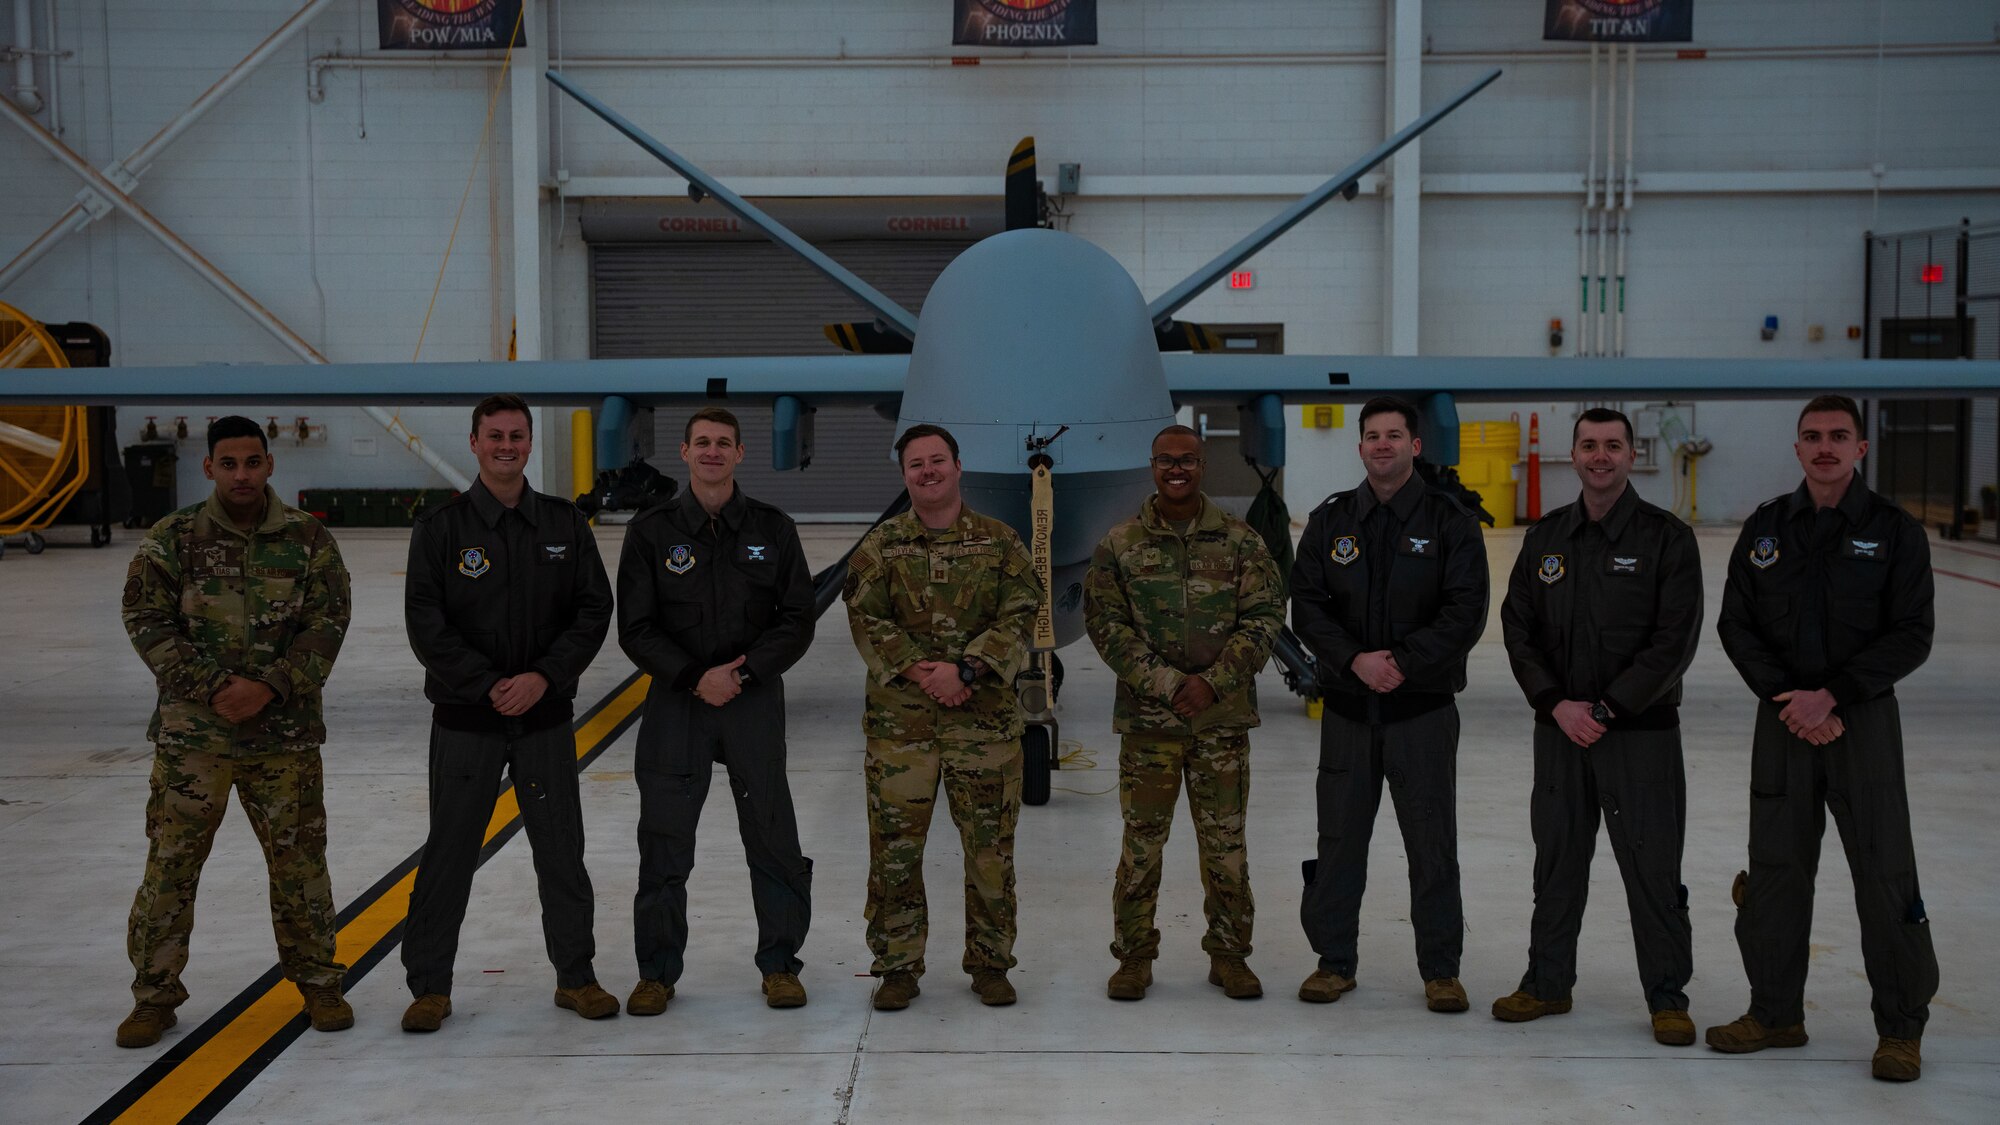 A group of eight people in military uniform stand in front of a military aircraft for a photo inside an aircraft hangar.